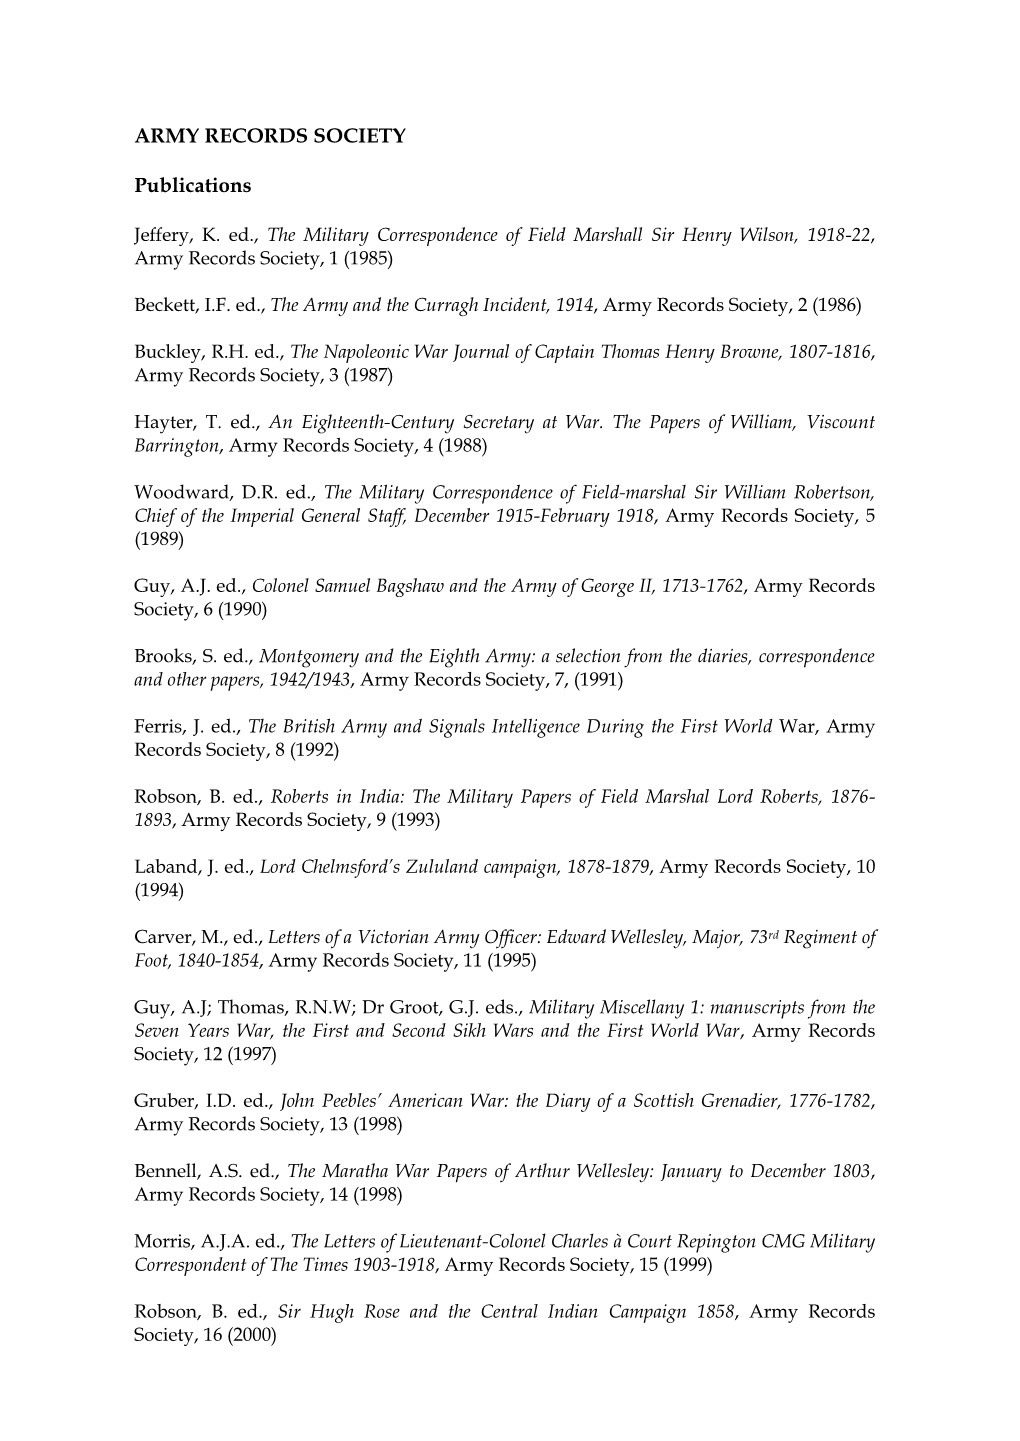 Army Records Society Publications